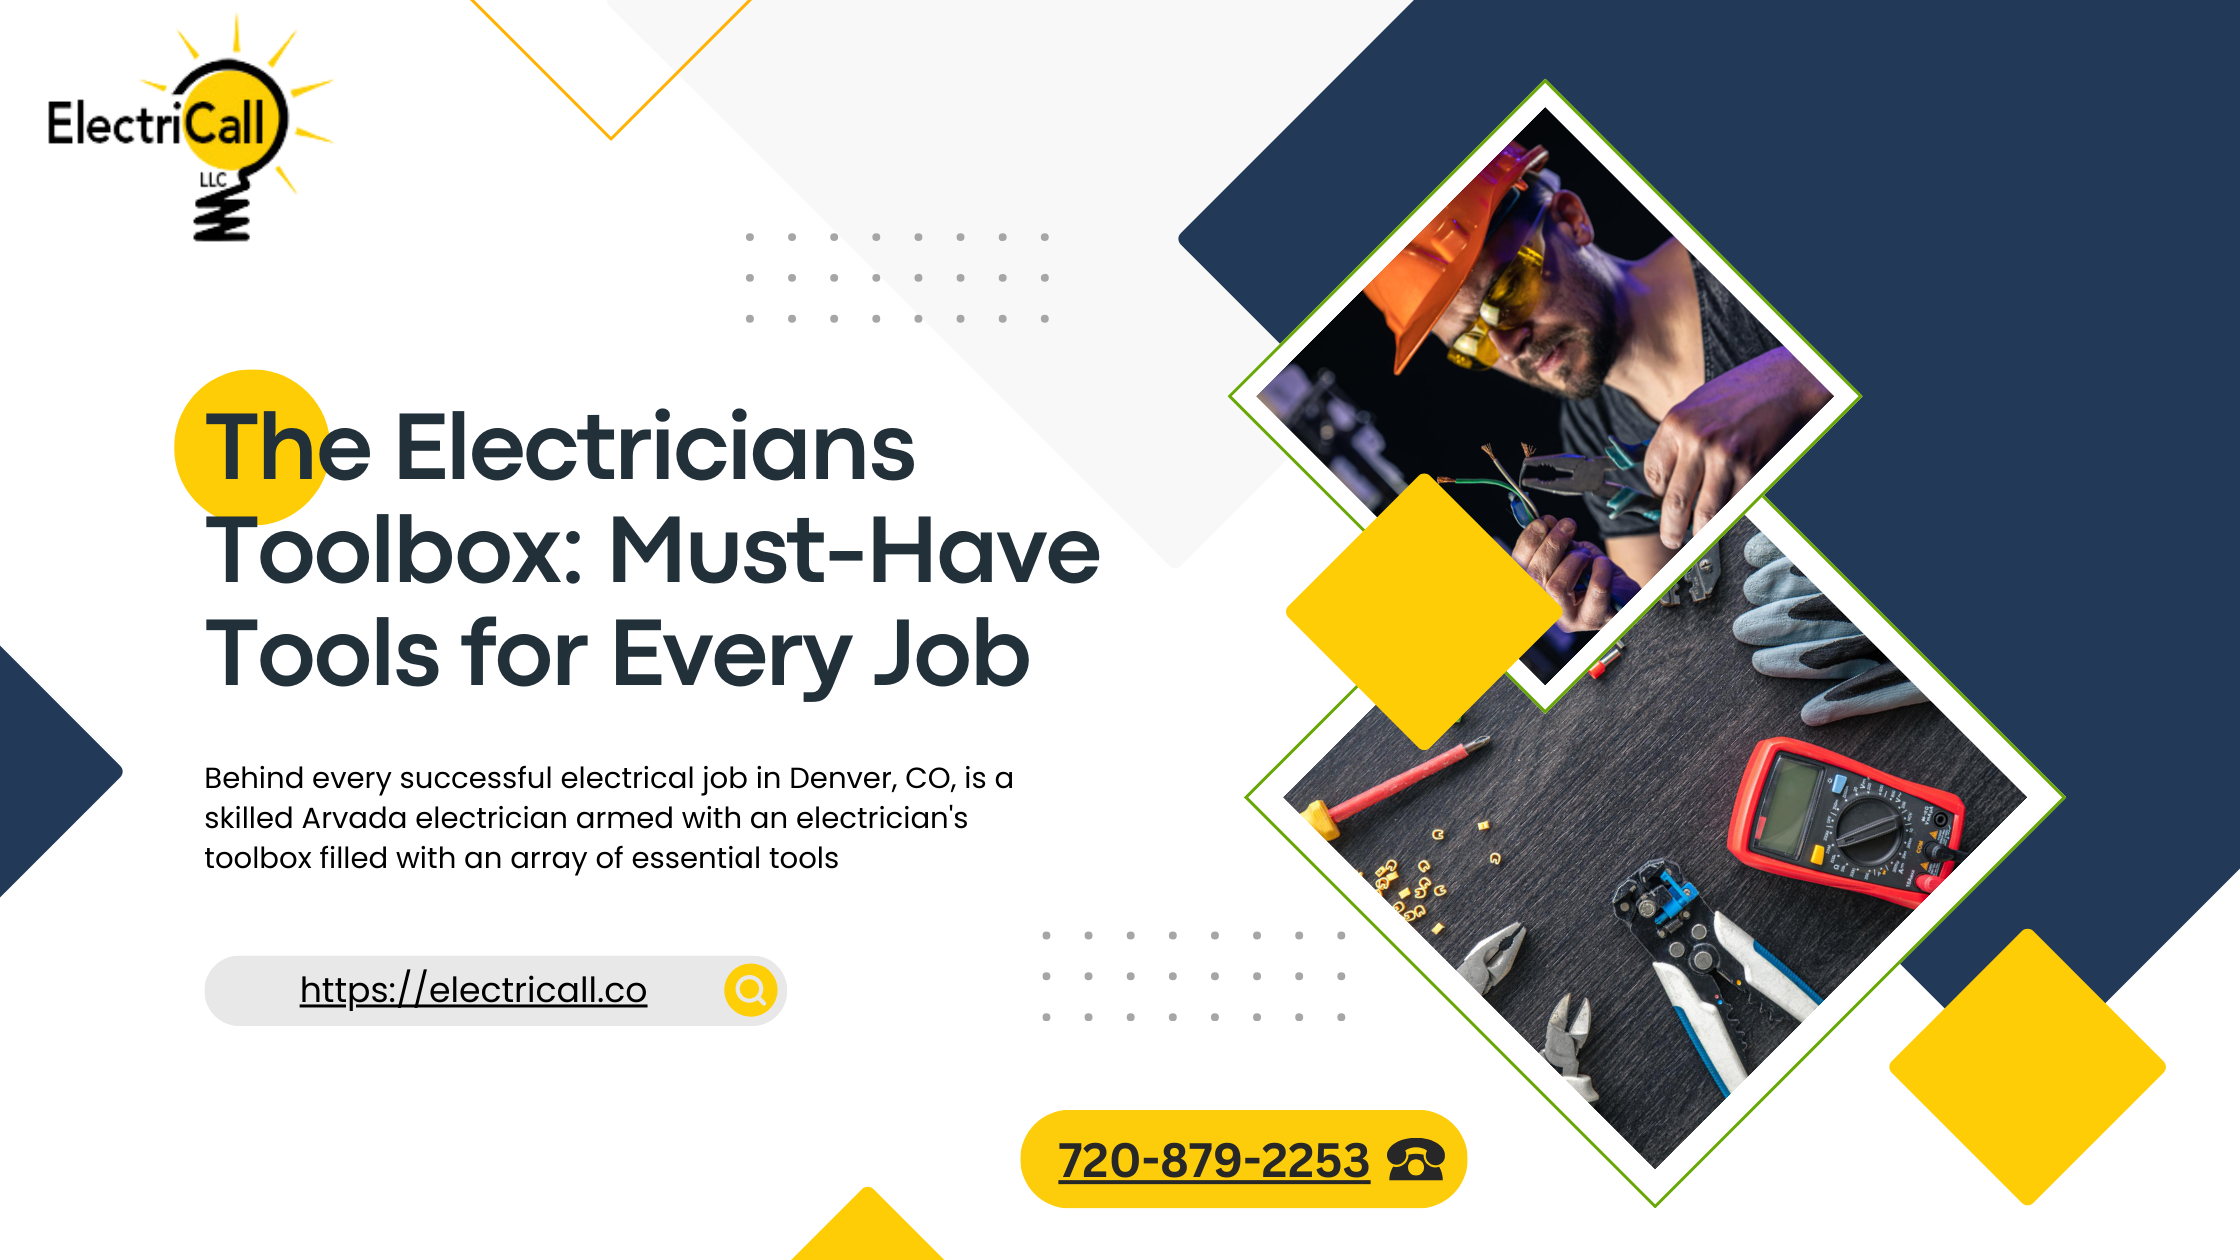 The Electricians Toolbox: Must-Have Tools for Every Job - Electricall